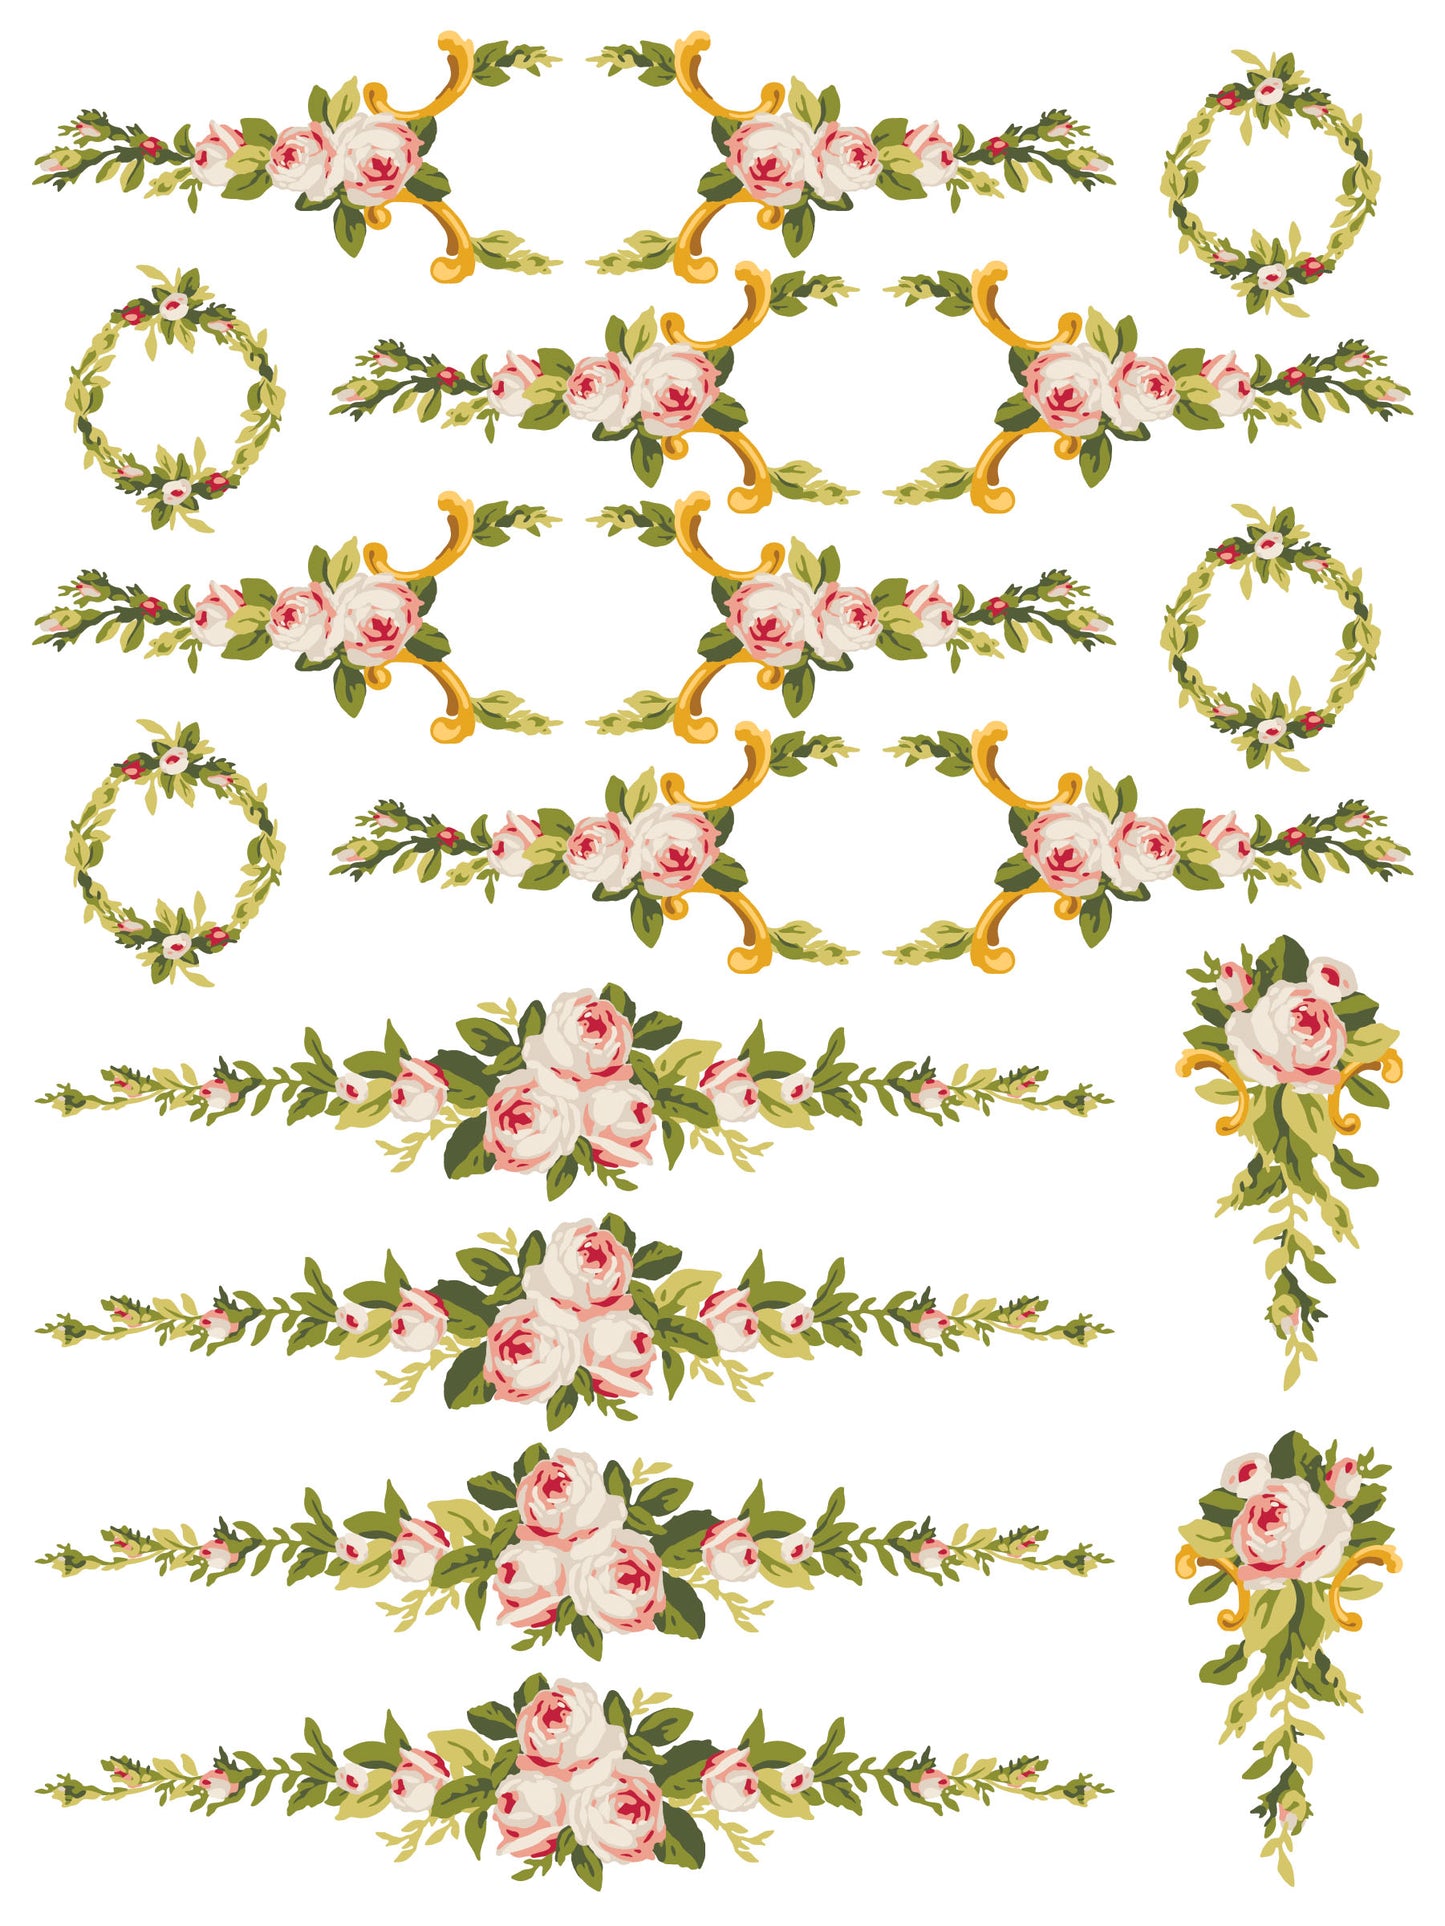 Petite Fleur Pink Paint InLay by IOD